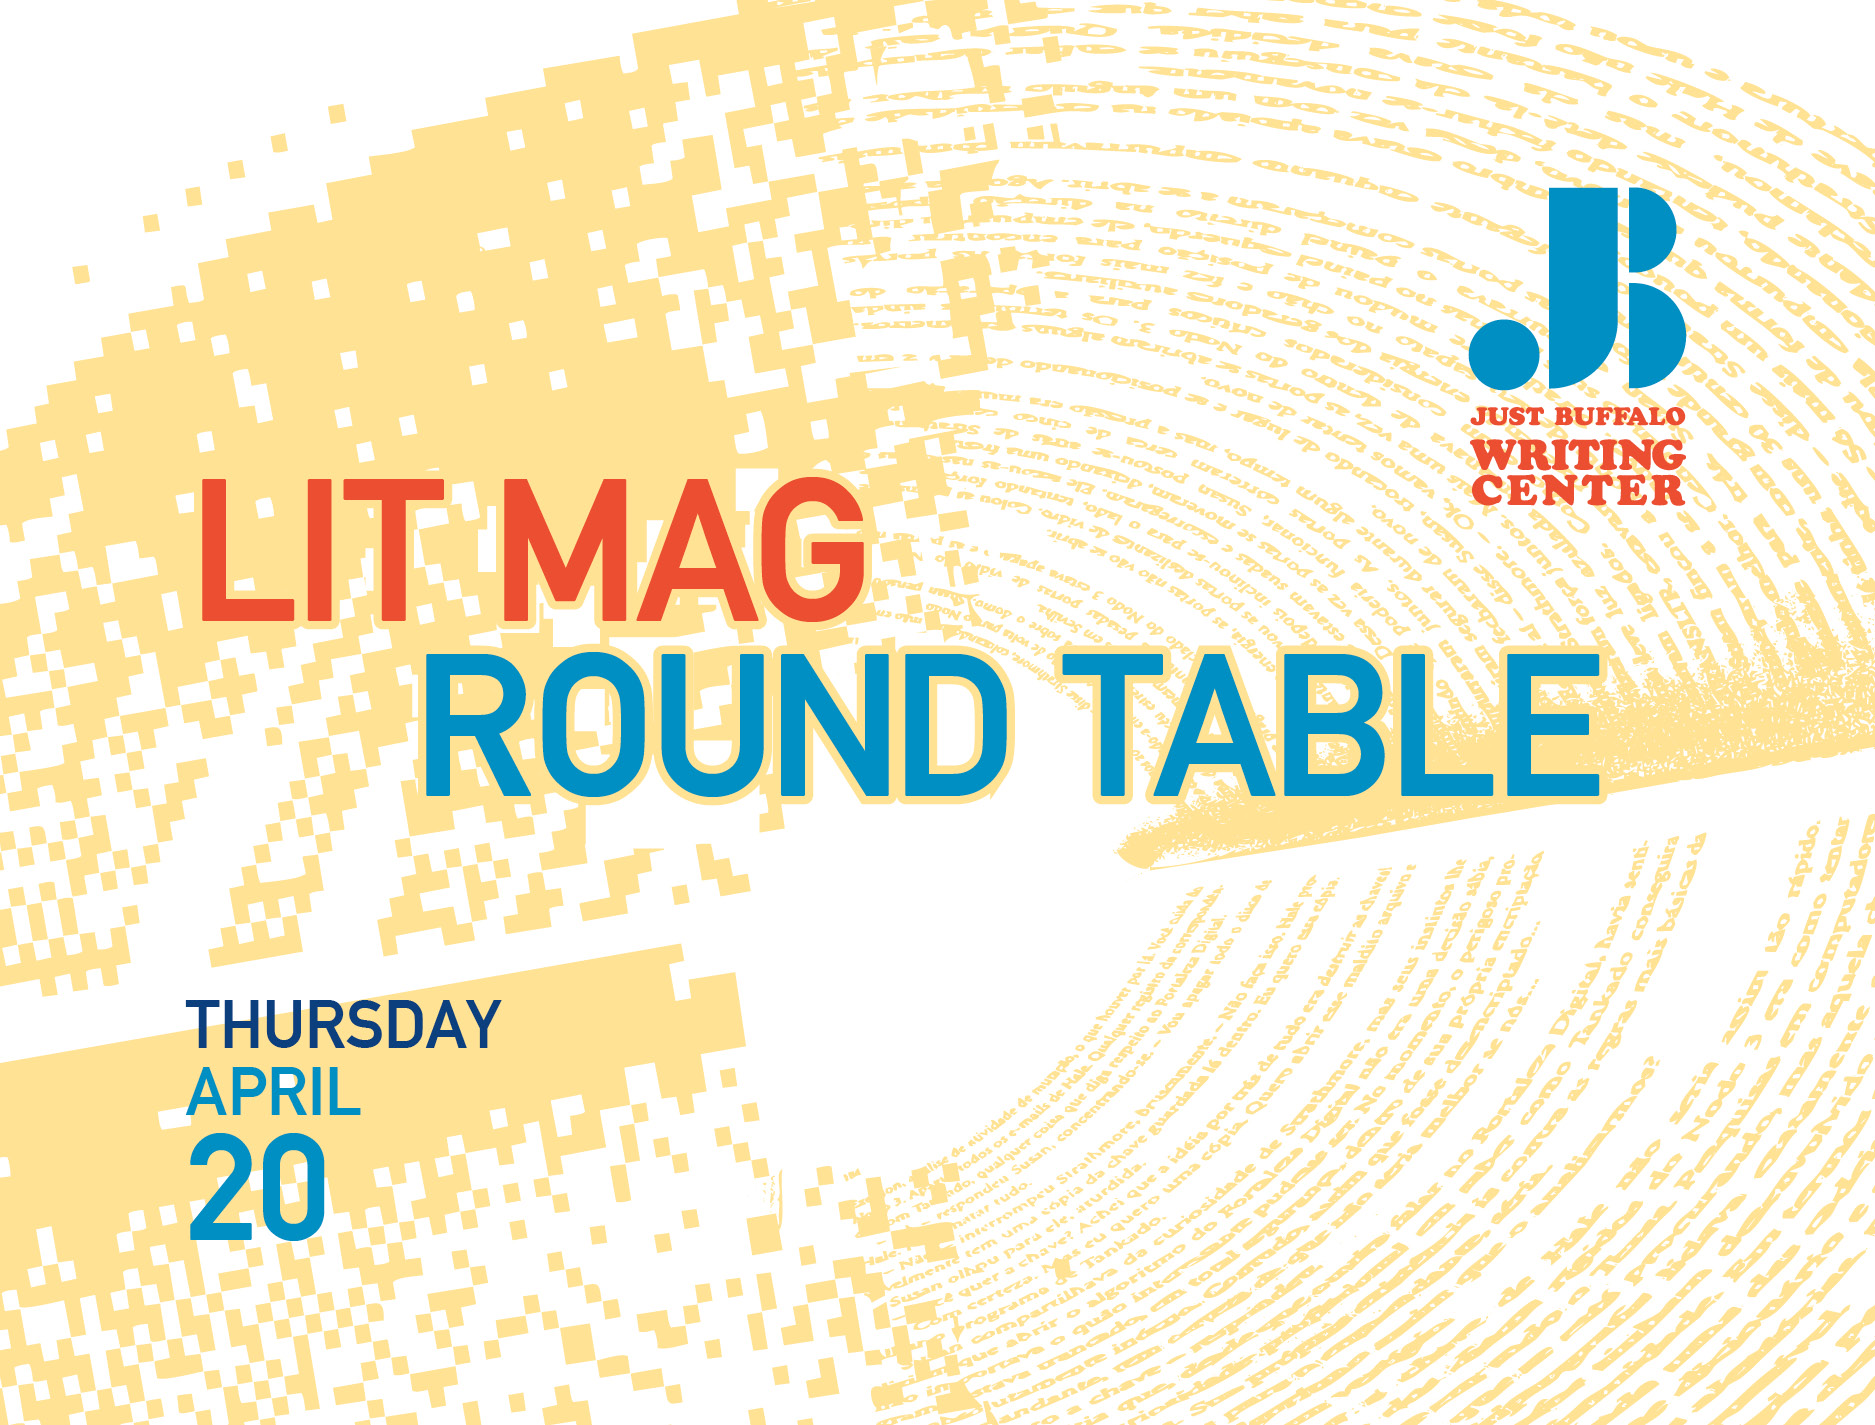 Lit Mag Round Table 2023